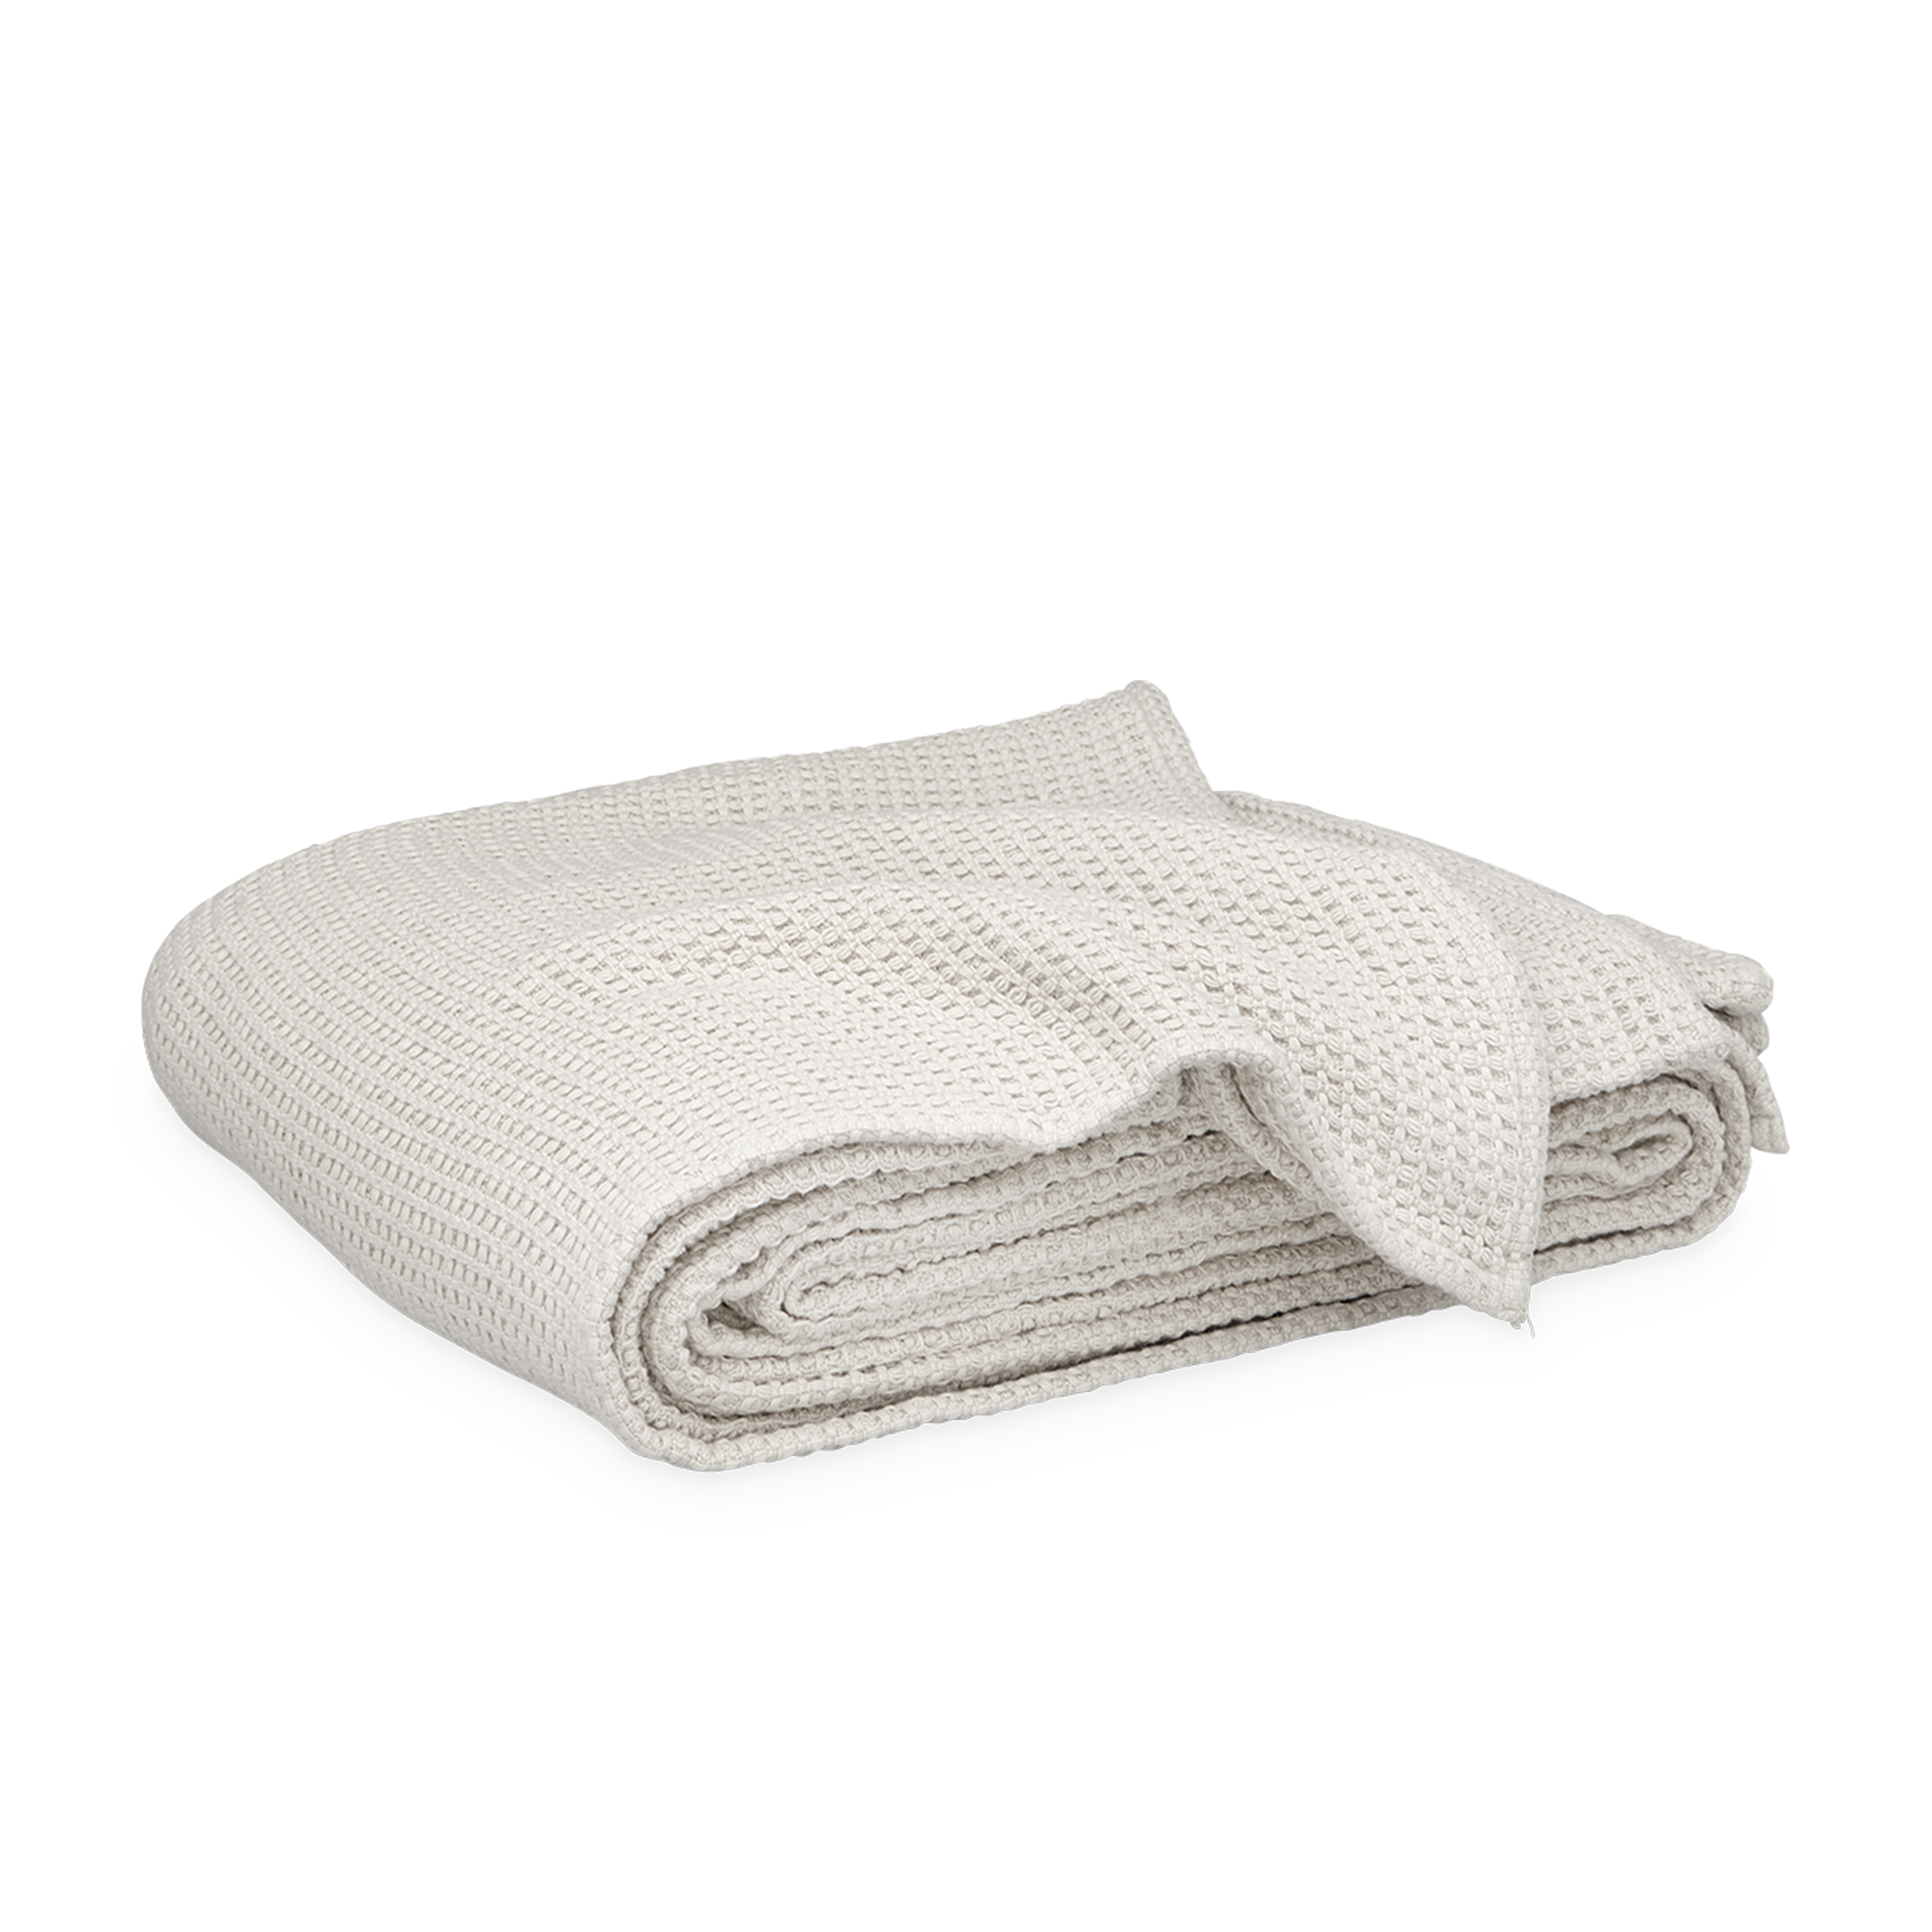 Clear Image of Matouk Chatham Blanket in Silver Color